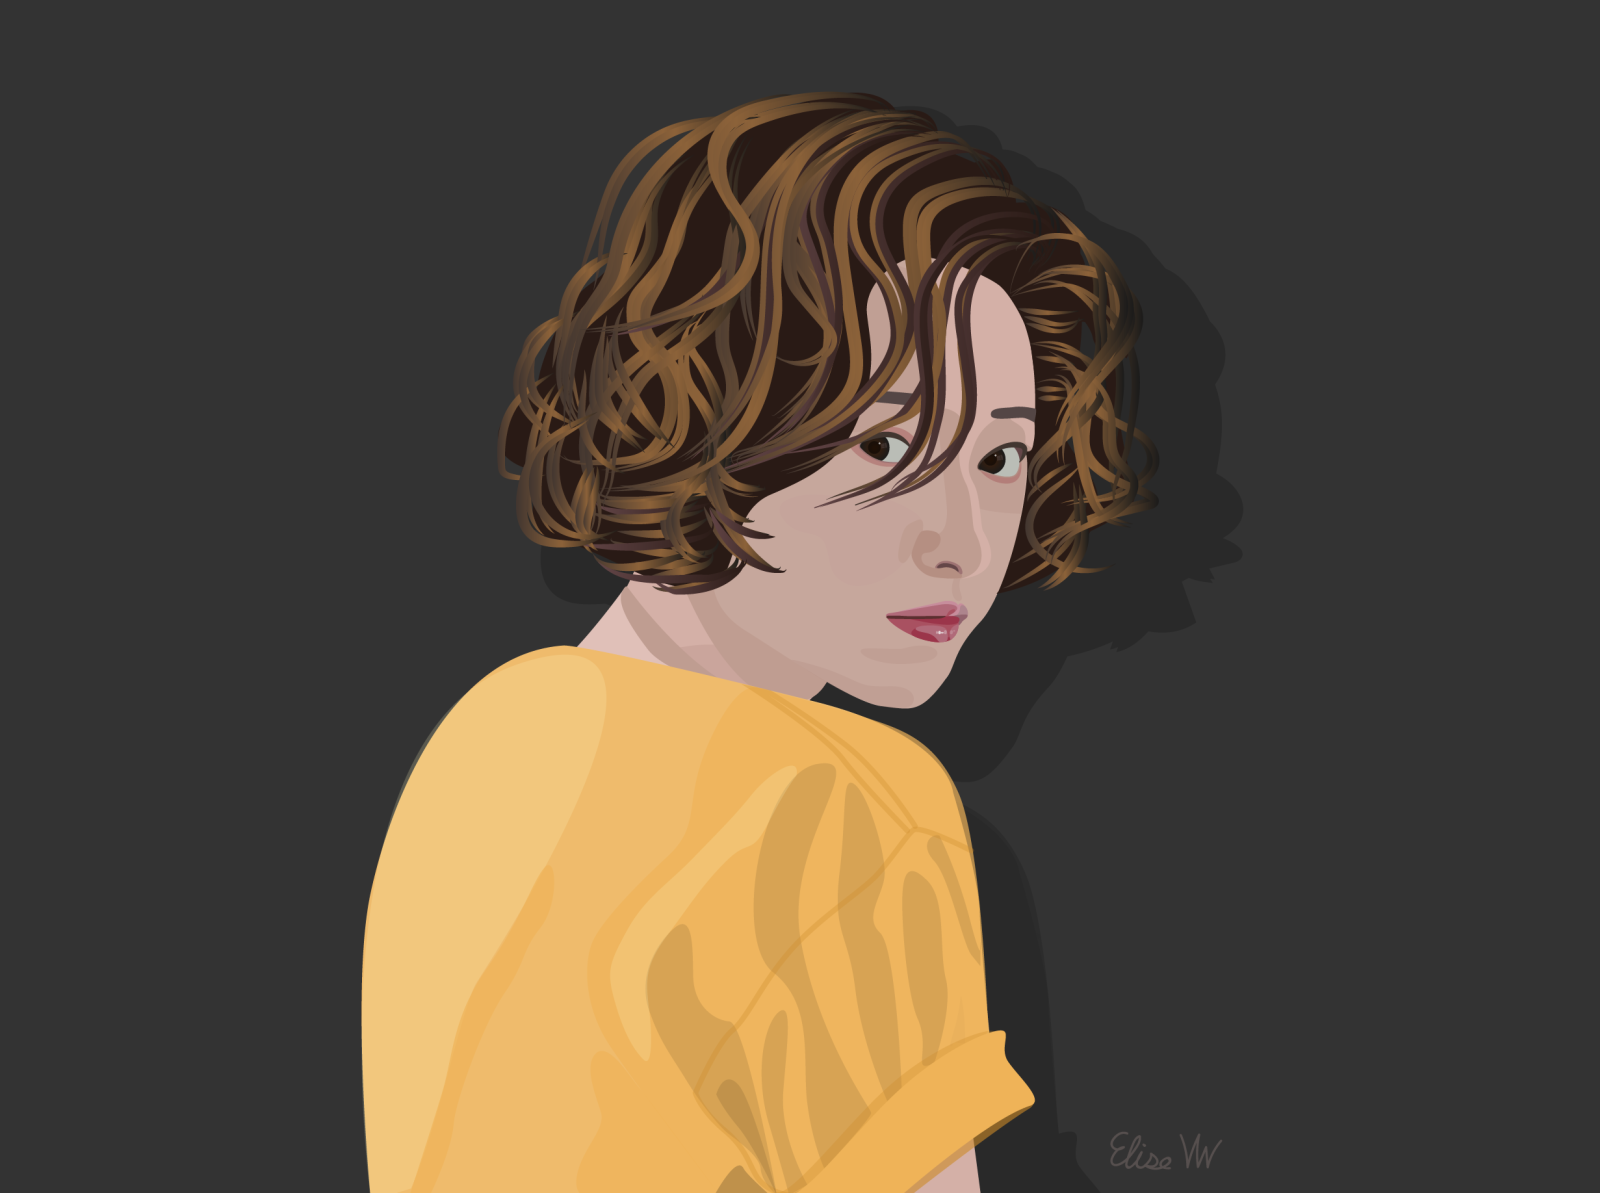 Woman In A Yellow Shirt Illustration By Elise On Dribbble